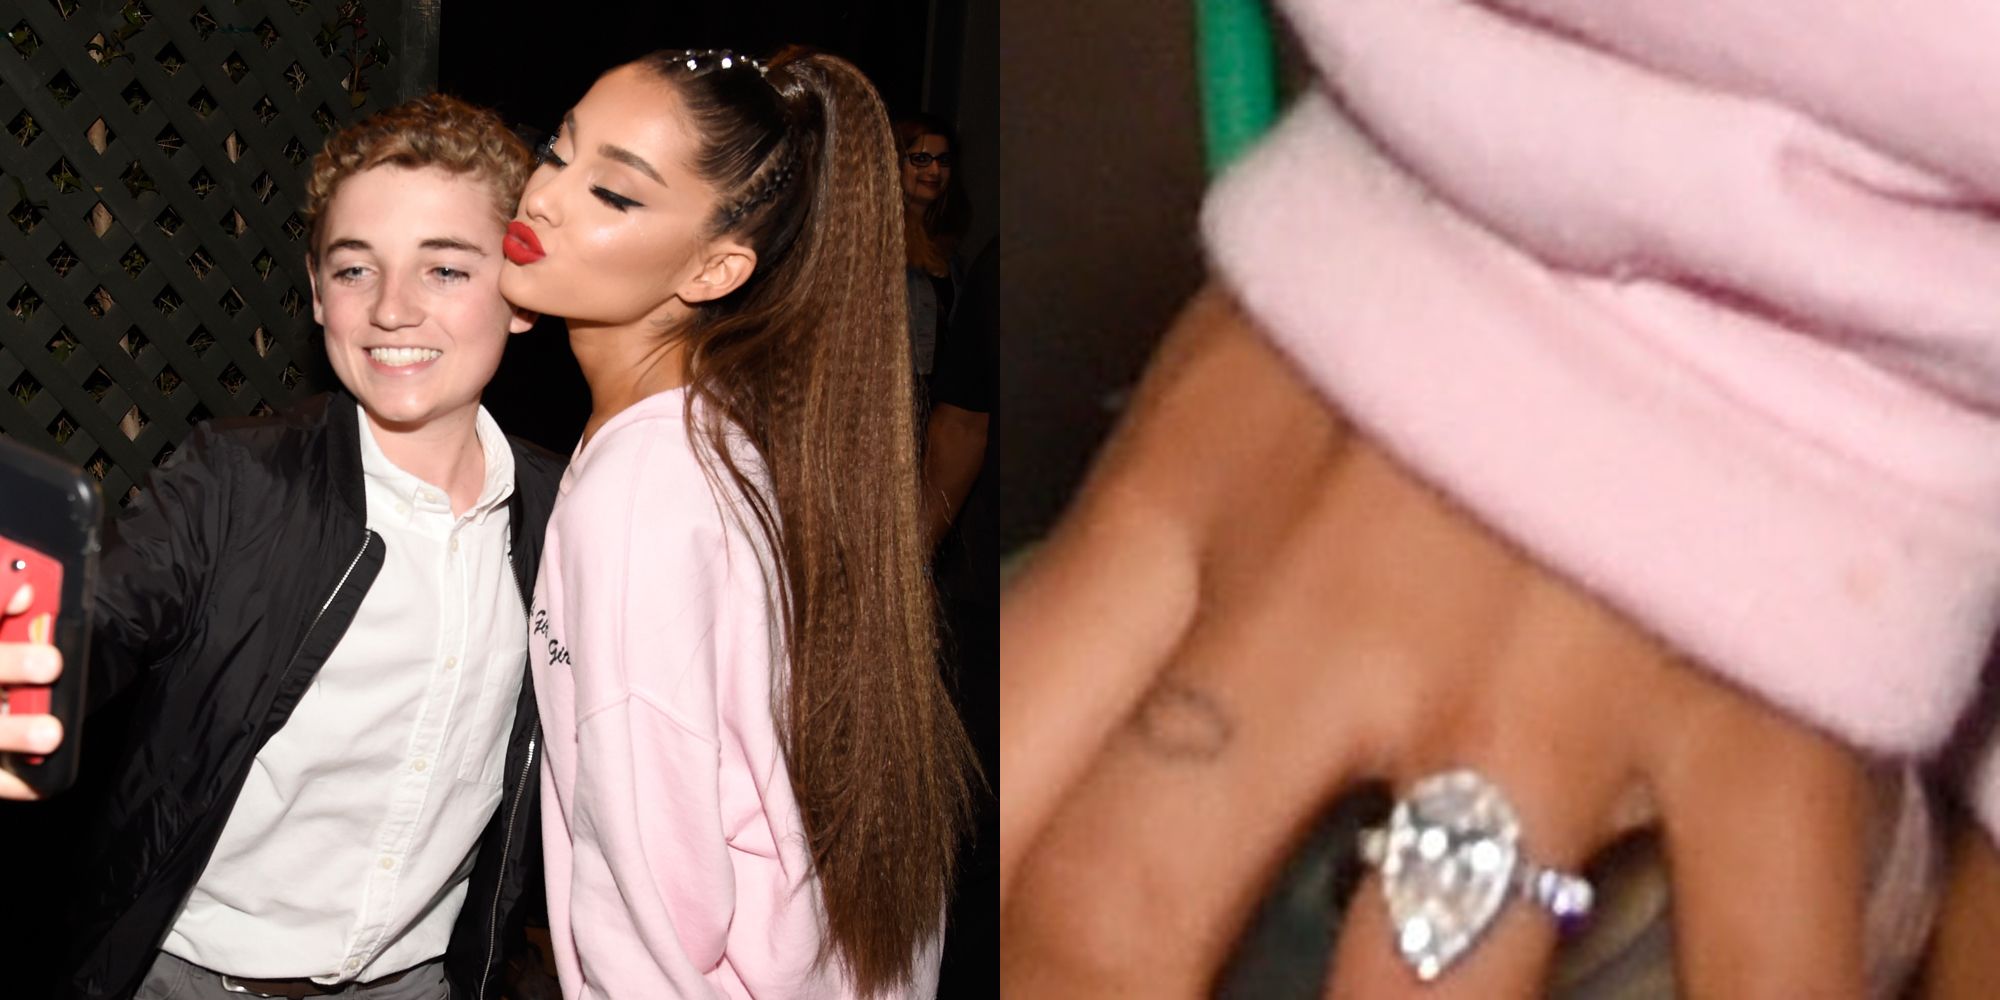 Ariana Grande Engagement Announcement: What It Means - The New York Times